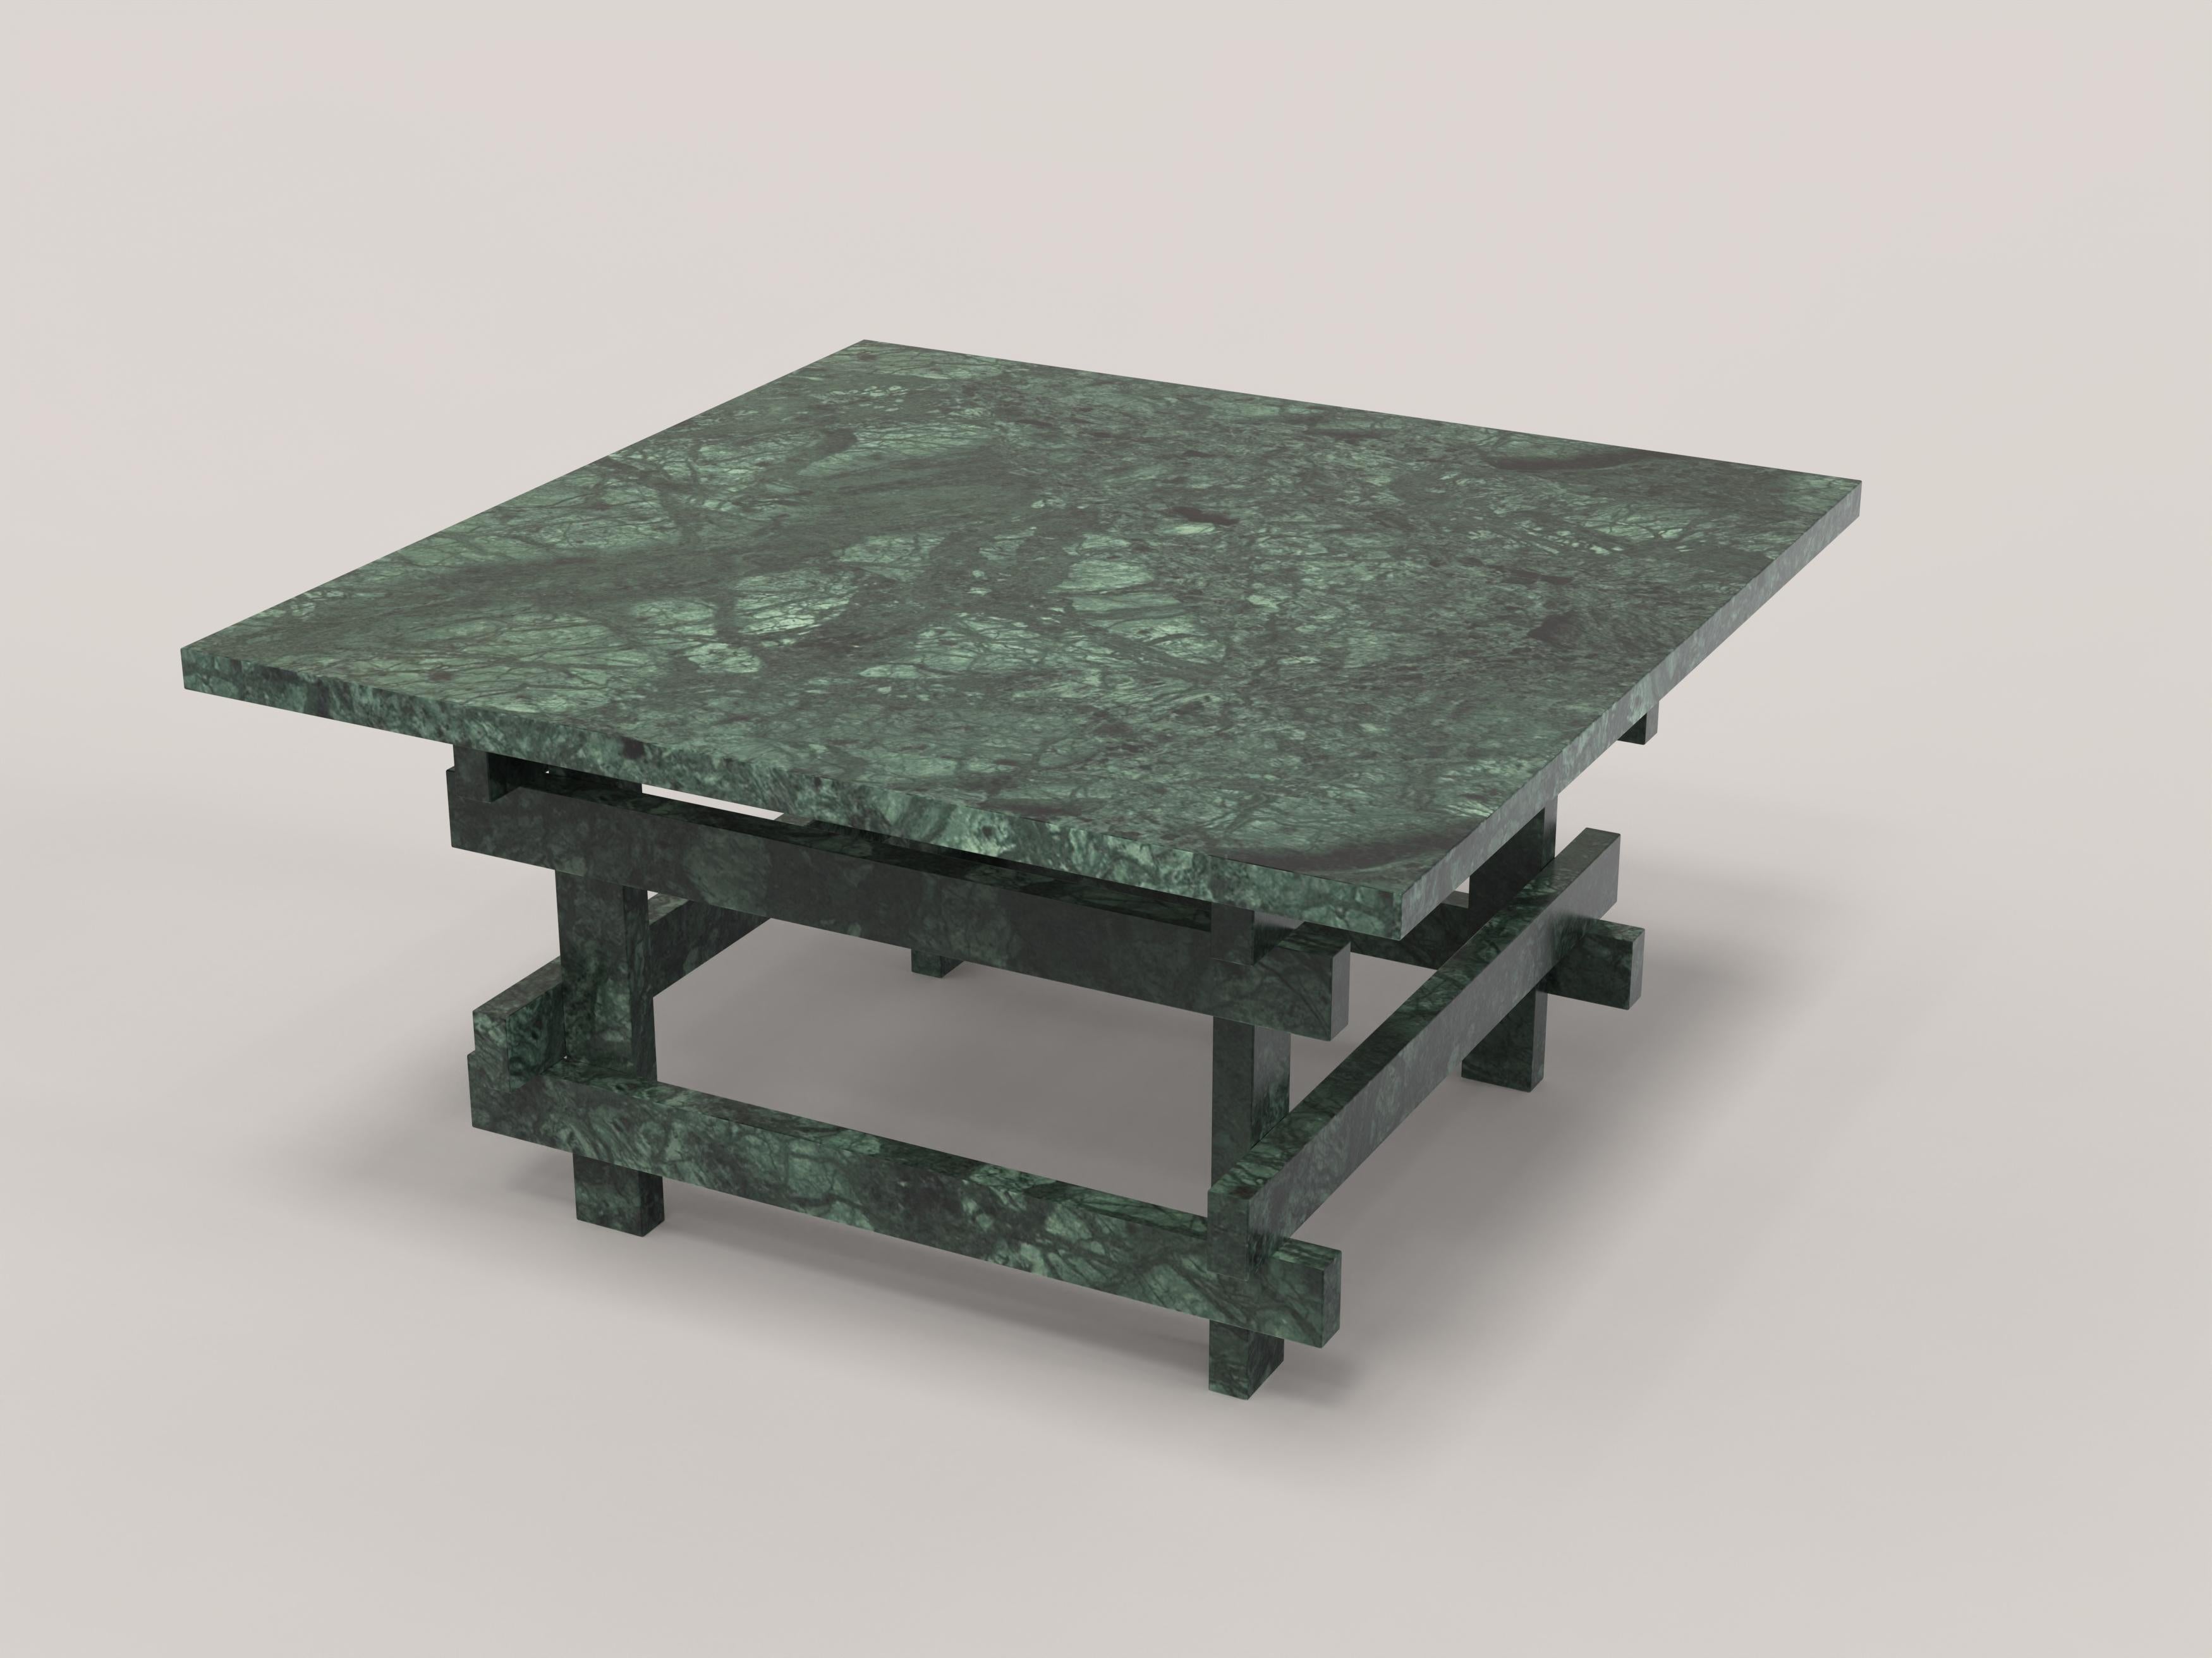 Italian Contemporary Limited Edition Marble Table, Paranoid V2 by Edizione Limitata For Sale